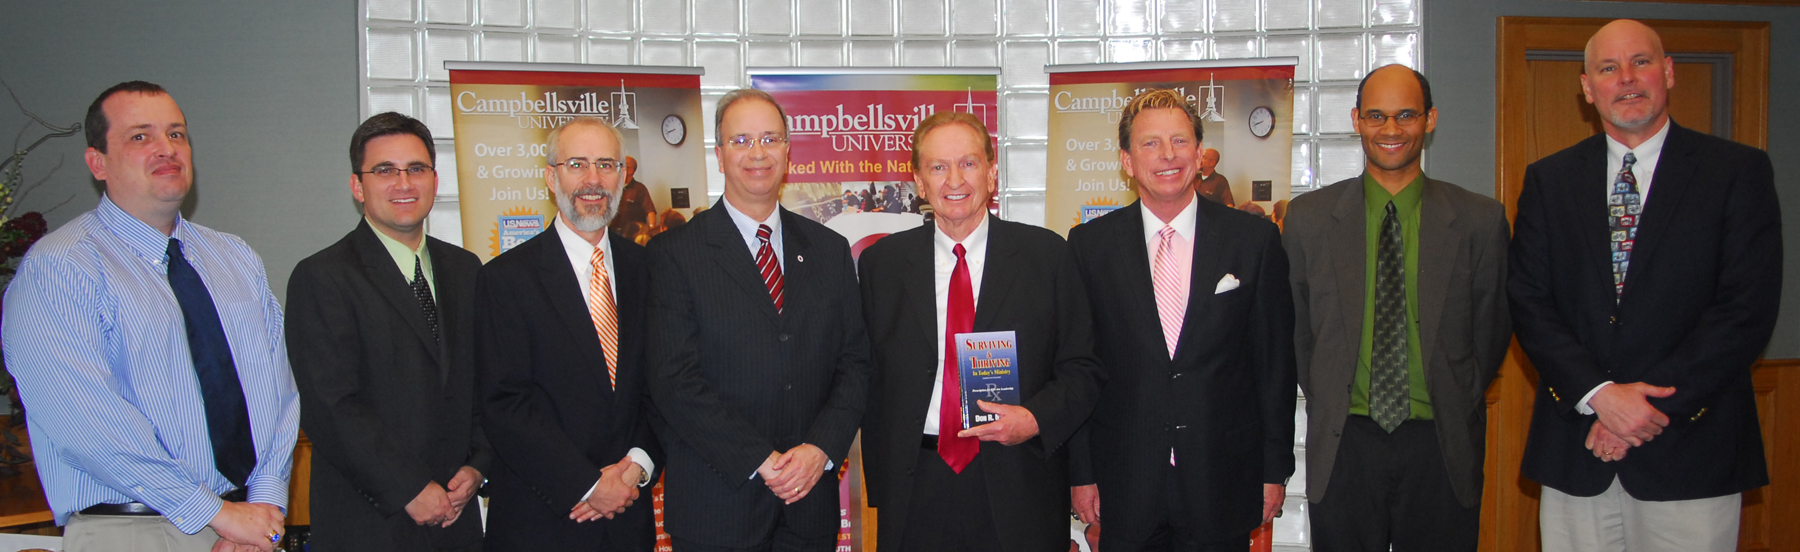 Members of the School of Theology faculty at Campbellsville University met with Dr. Don Mathis, president of the Kentucky Baptist Convention, who donated his books to students in the School of Theology. From left are: Dr. Joe Early; Dr. Shane Garrison; Dr. John Hurtgen, dean of the School of Theology; Dr. Michael V. Carter, president of Campbellsville University; Mathis; Dr. Ted Taylor; Dr. Jarvis Williams; and Dr. Scott Wigginton. (Campbellsville University Photo by Joan C. McKinney)